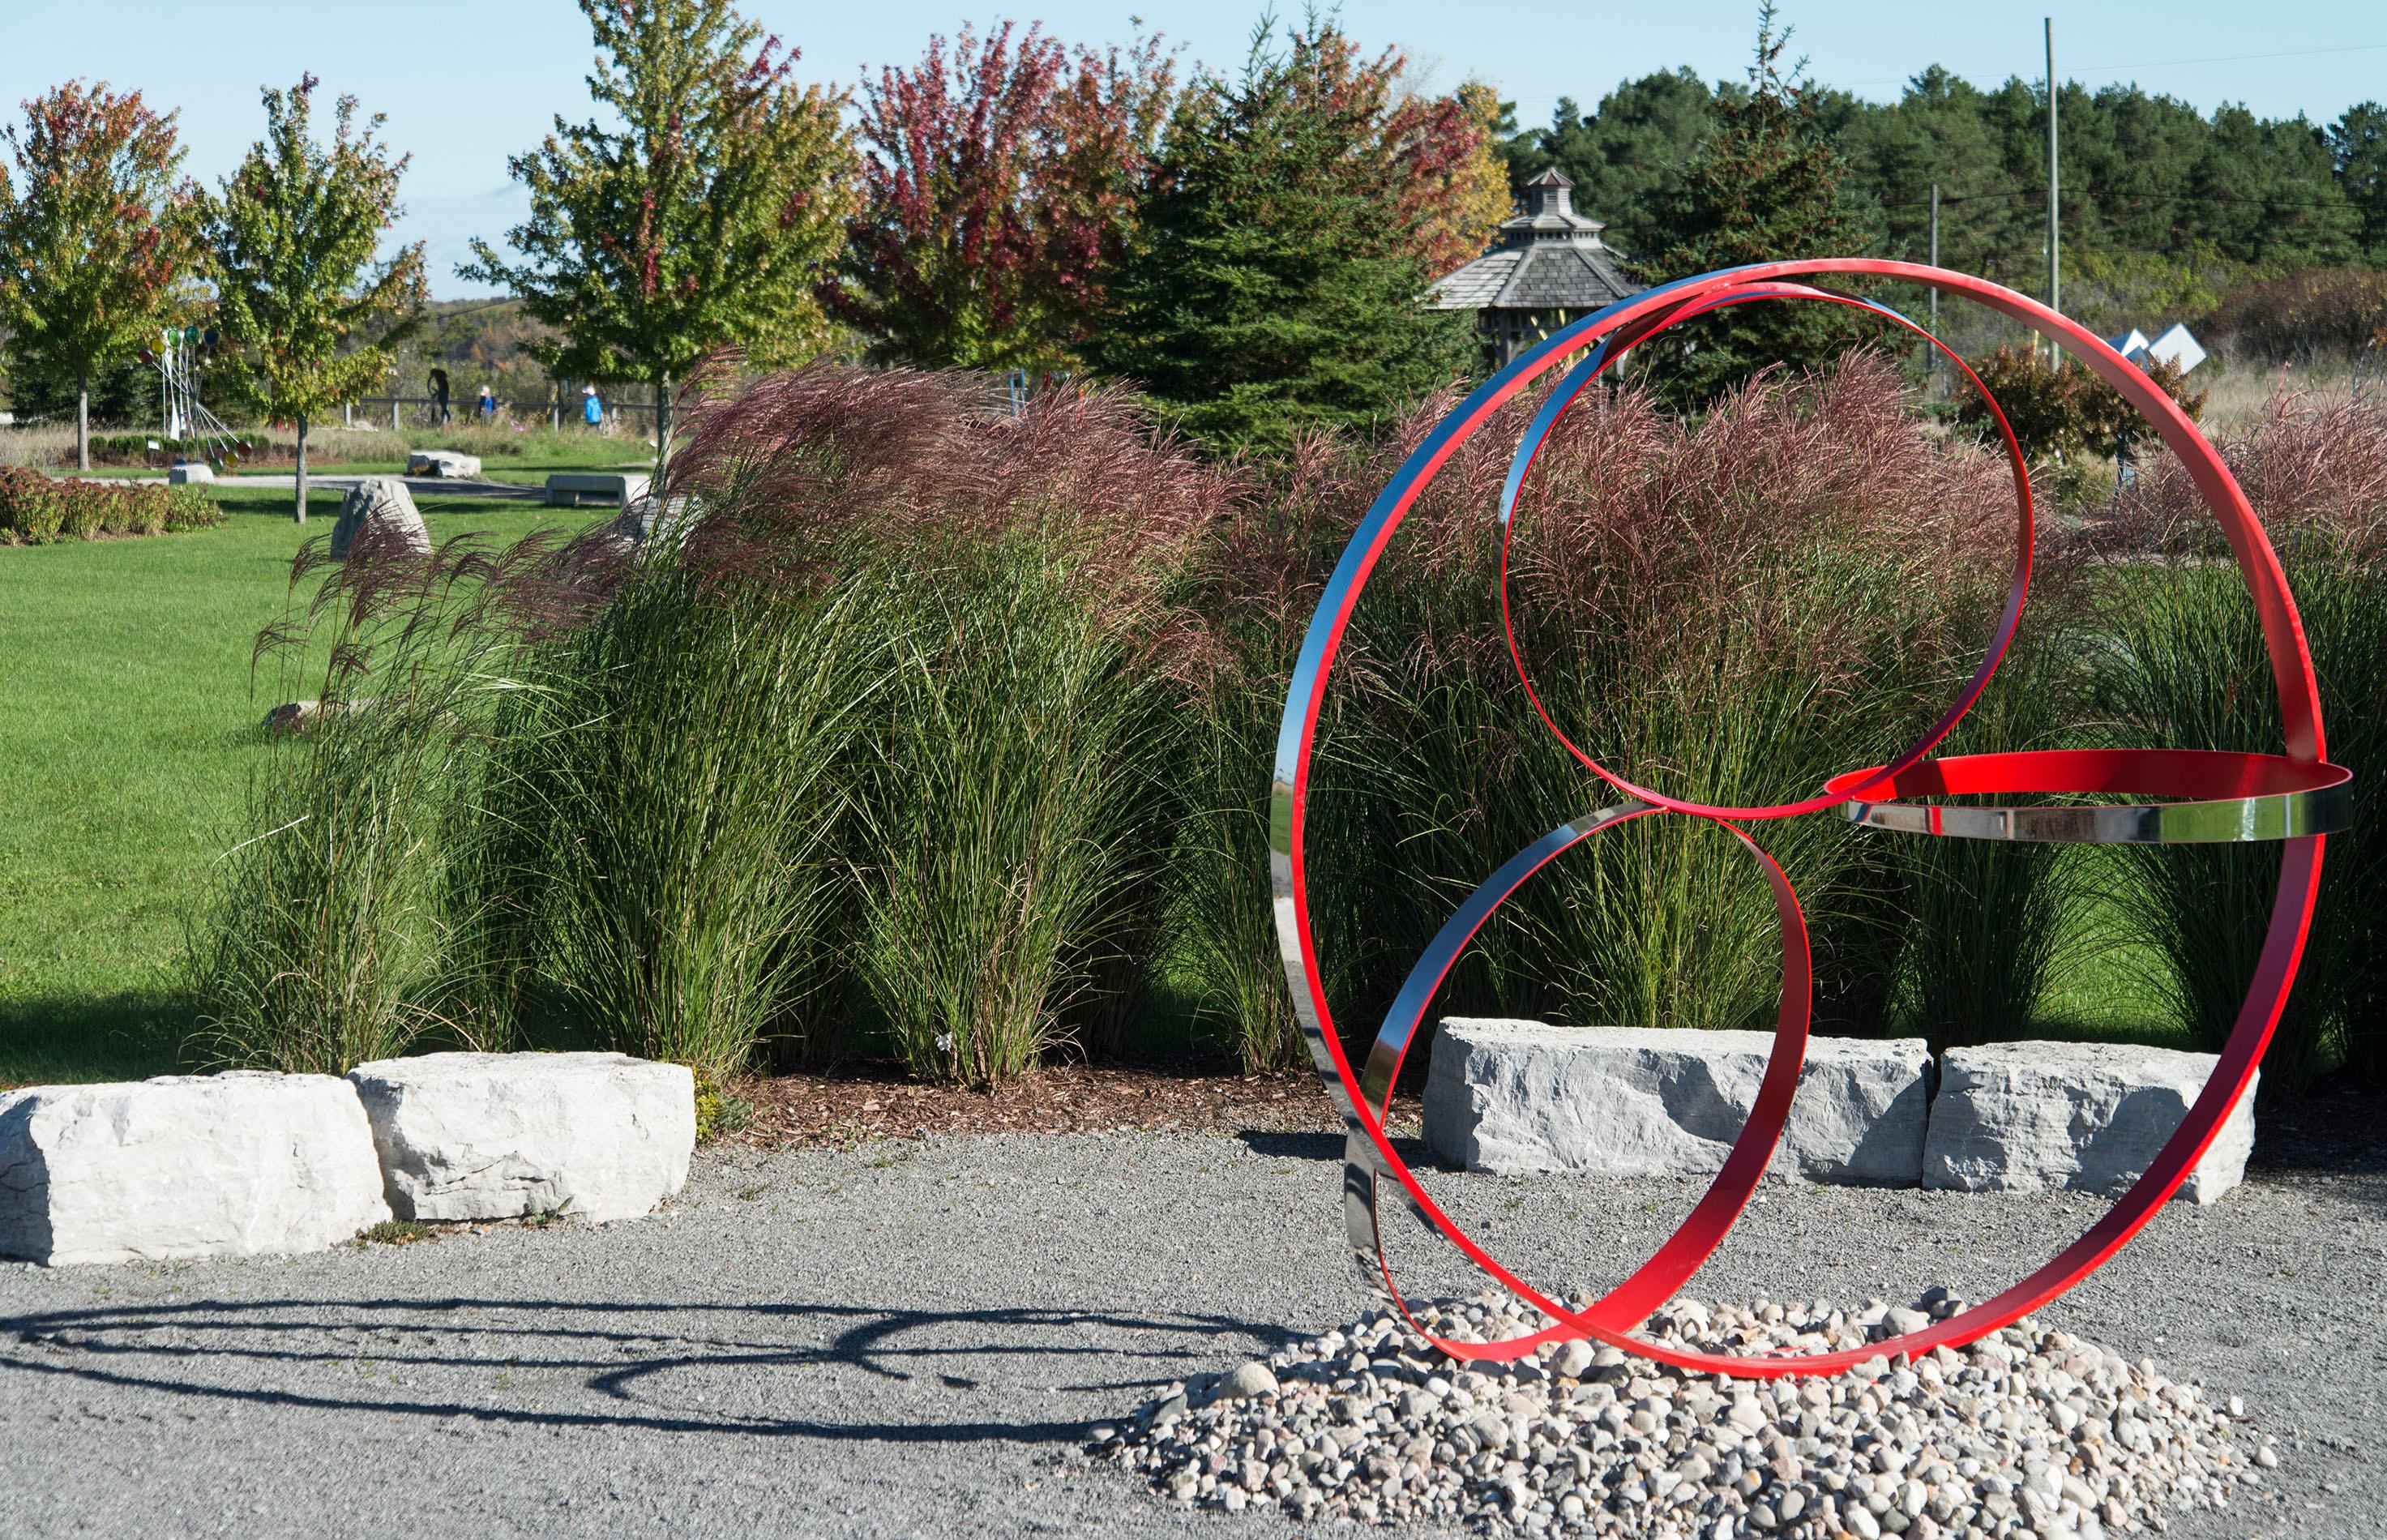 Four stainless steel rings, one side in poppy red, are curated into a elegant outdoor composition by Philippe Pallafray. This minimalist sculpture plays with space framing the landscape yet sitting in contrast with it. The title of the sculpture may